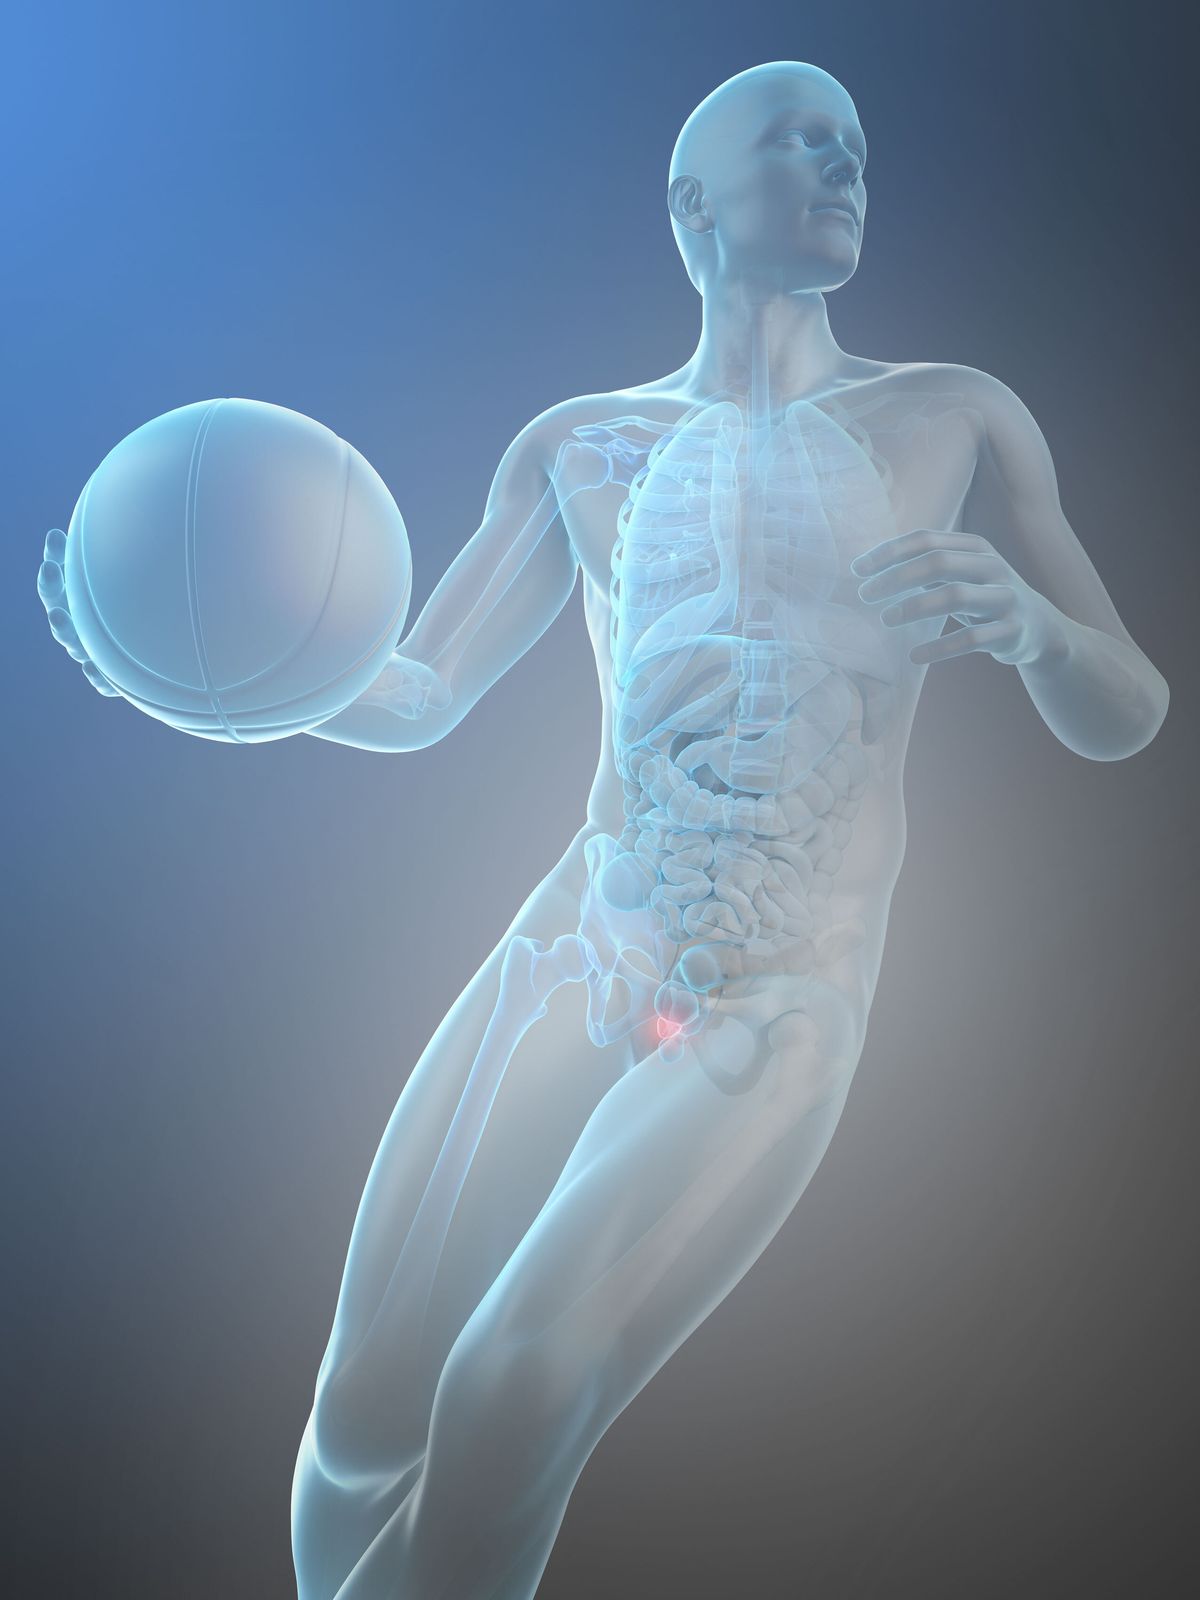 anatomical drawing of man with basketball and highlighted prostate